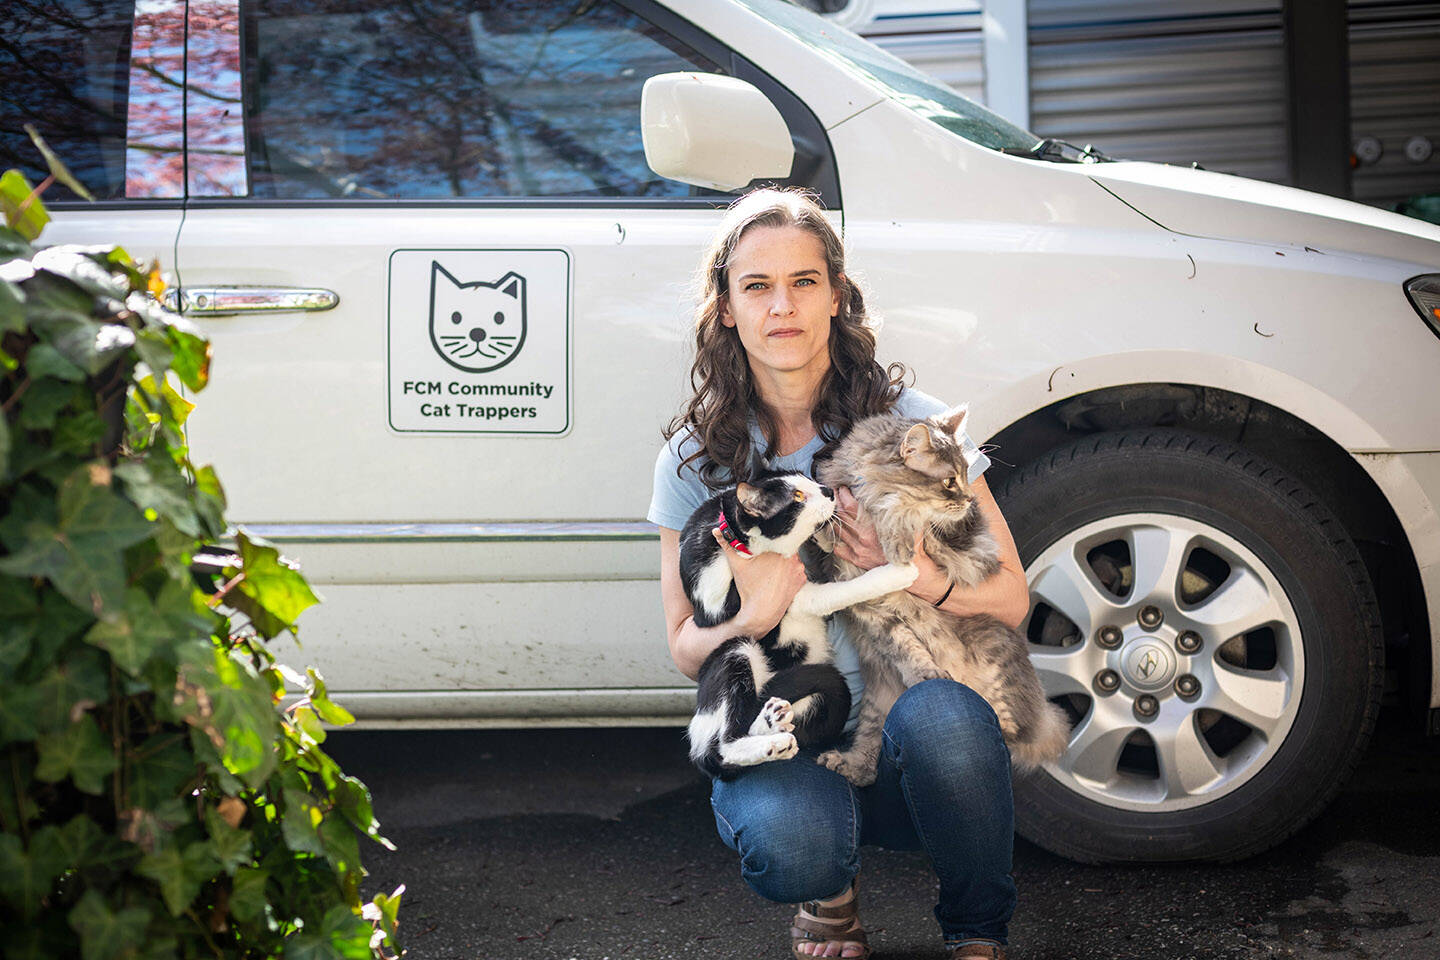 Cat rescue organizations are “drowning in cats” that have been surrendered by owners because they can’t find pet-friendly housing, said Christy Moschopedis of FCM Community Cat Trappers. (Darren McDonald)